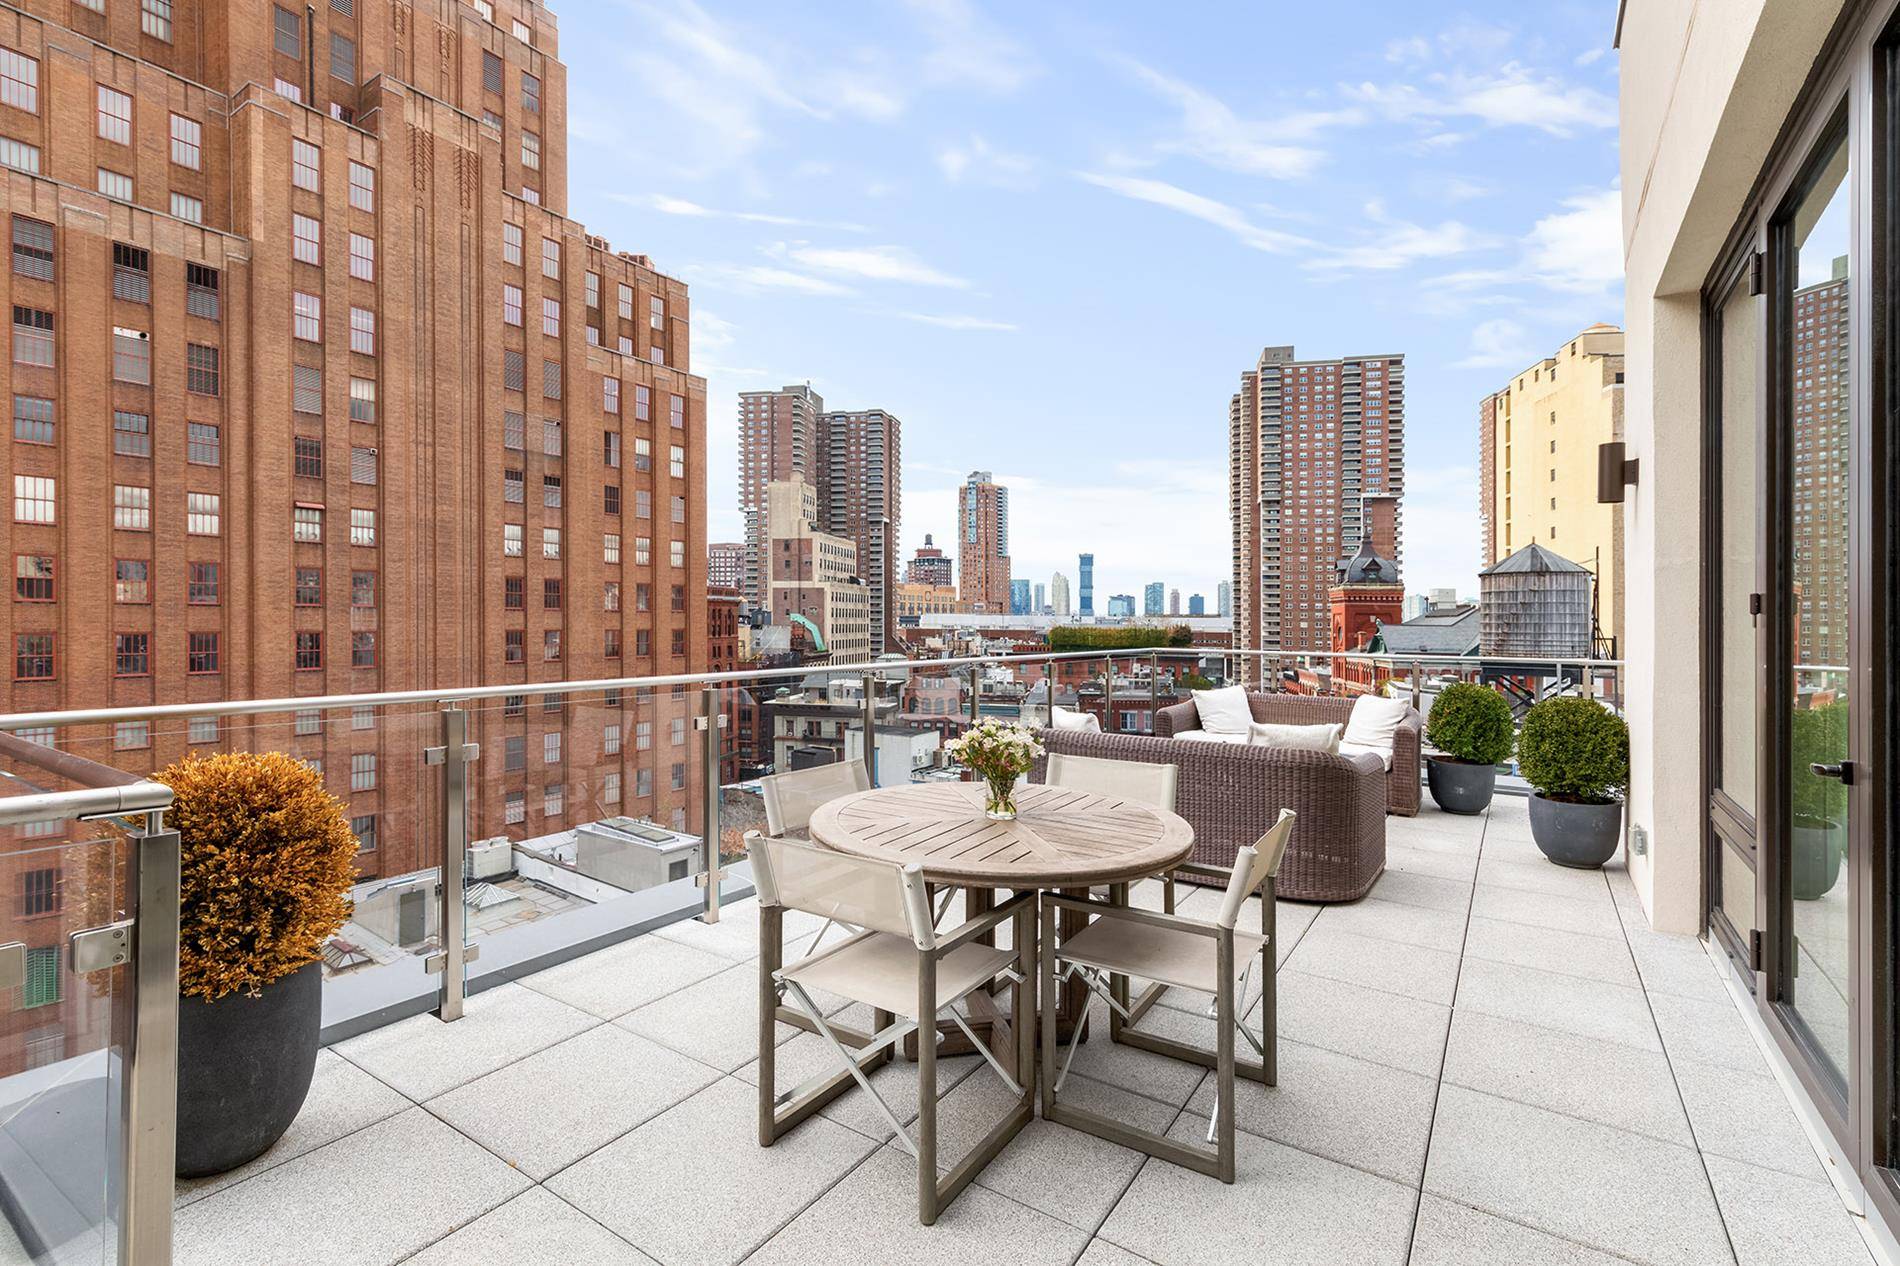 Located on a quiet stretch of road just moments from the finest restaurants, world class shopping, and high end art galleries lining Tribeca s uncrowded streets, this charismatic 7, 261 ...